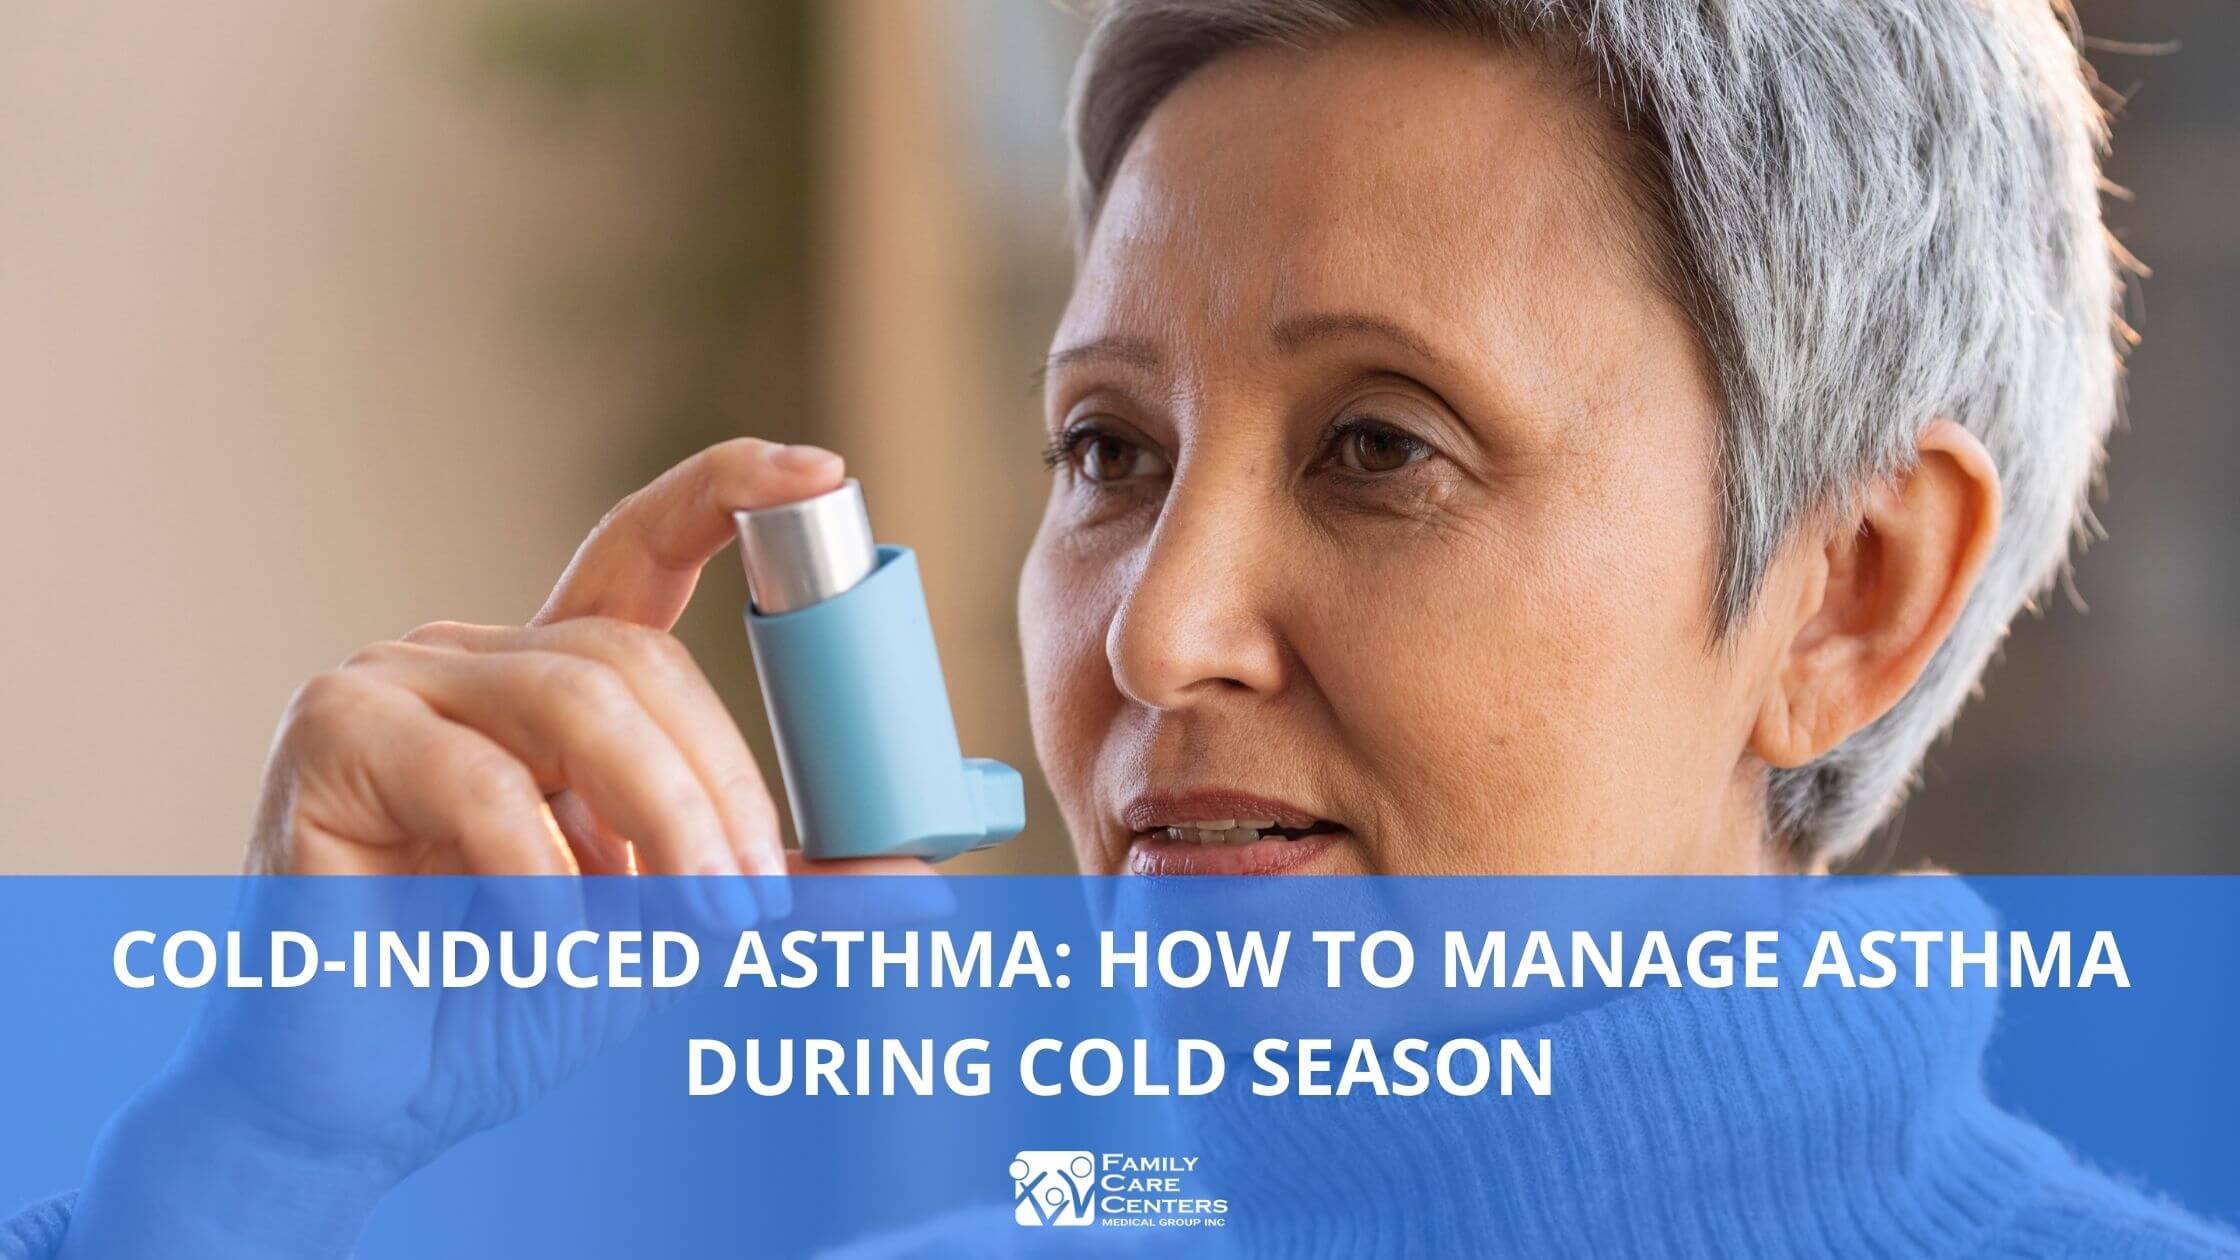 Cold-Induced Asthma: How to Manage Asthma During Cold Season